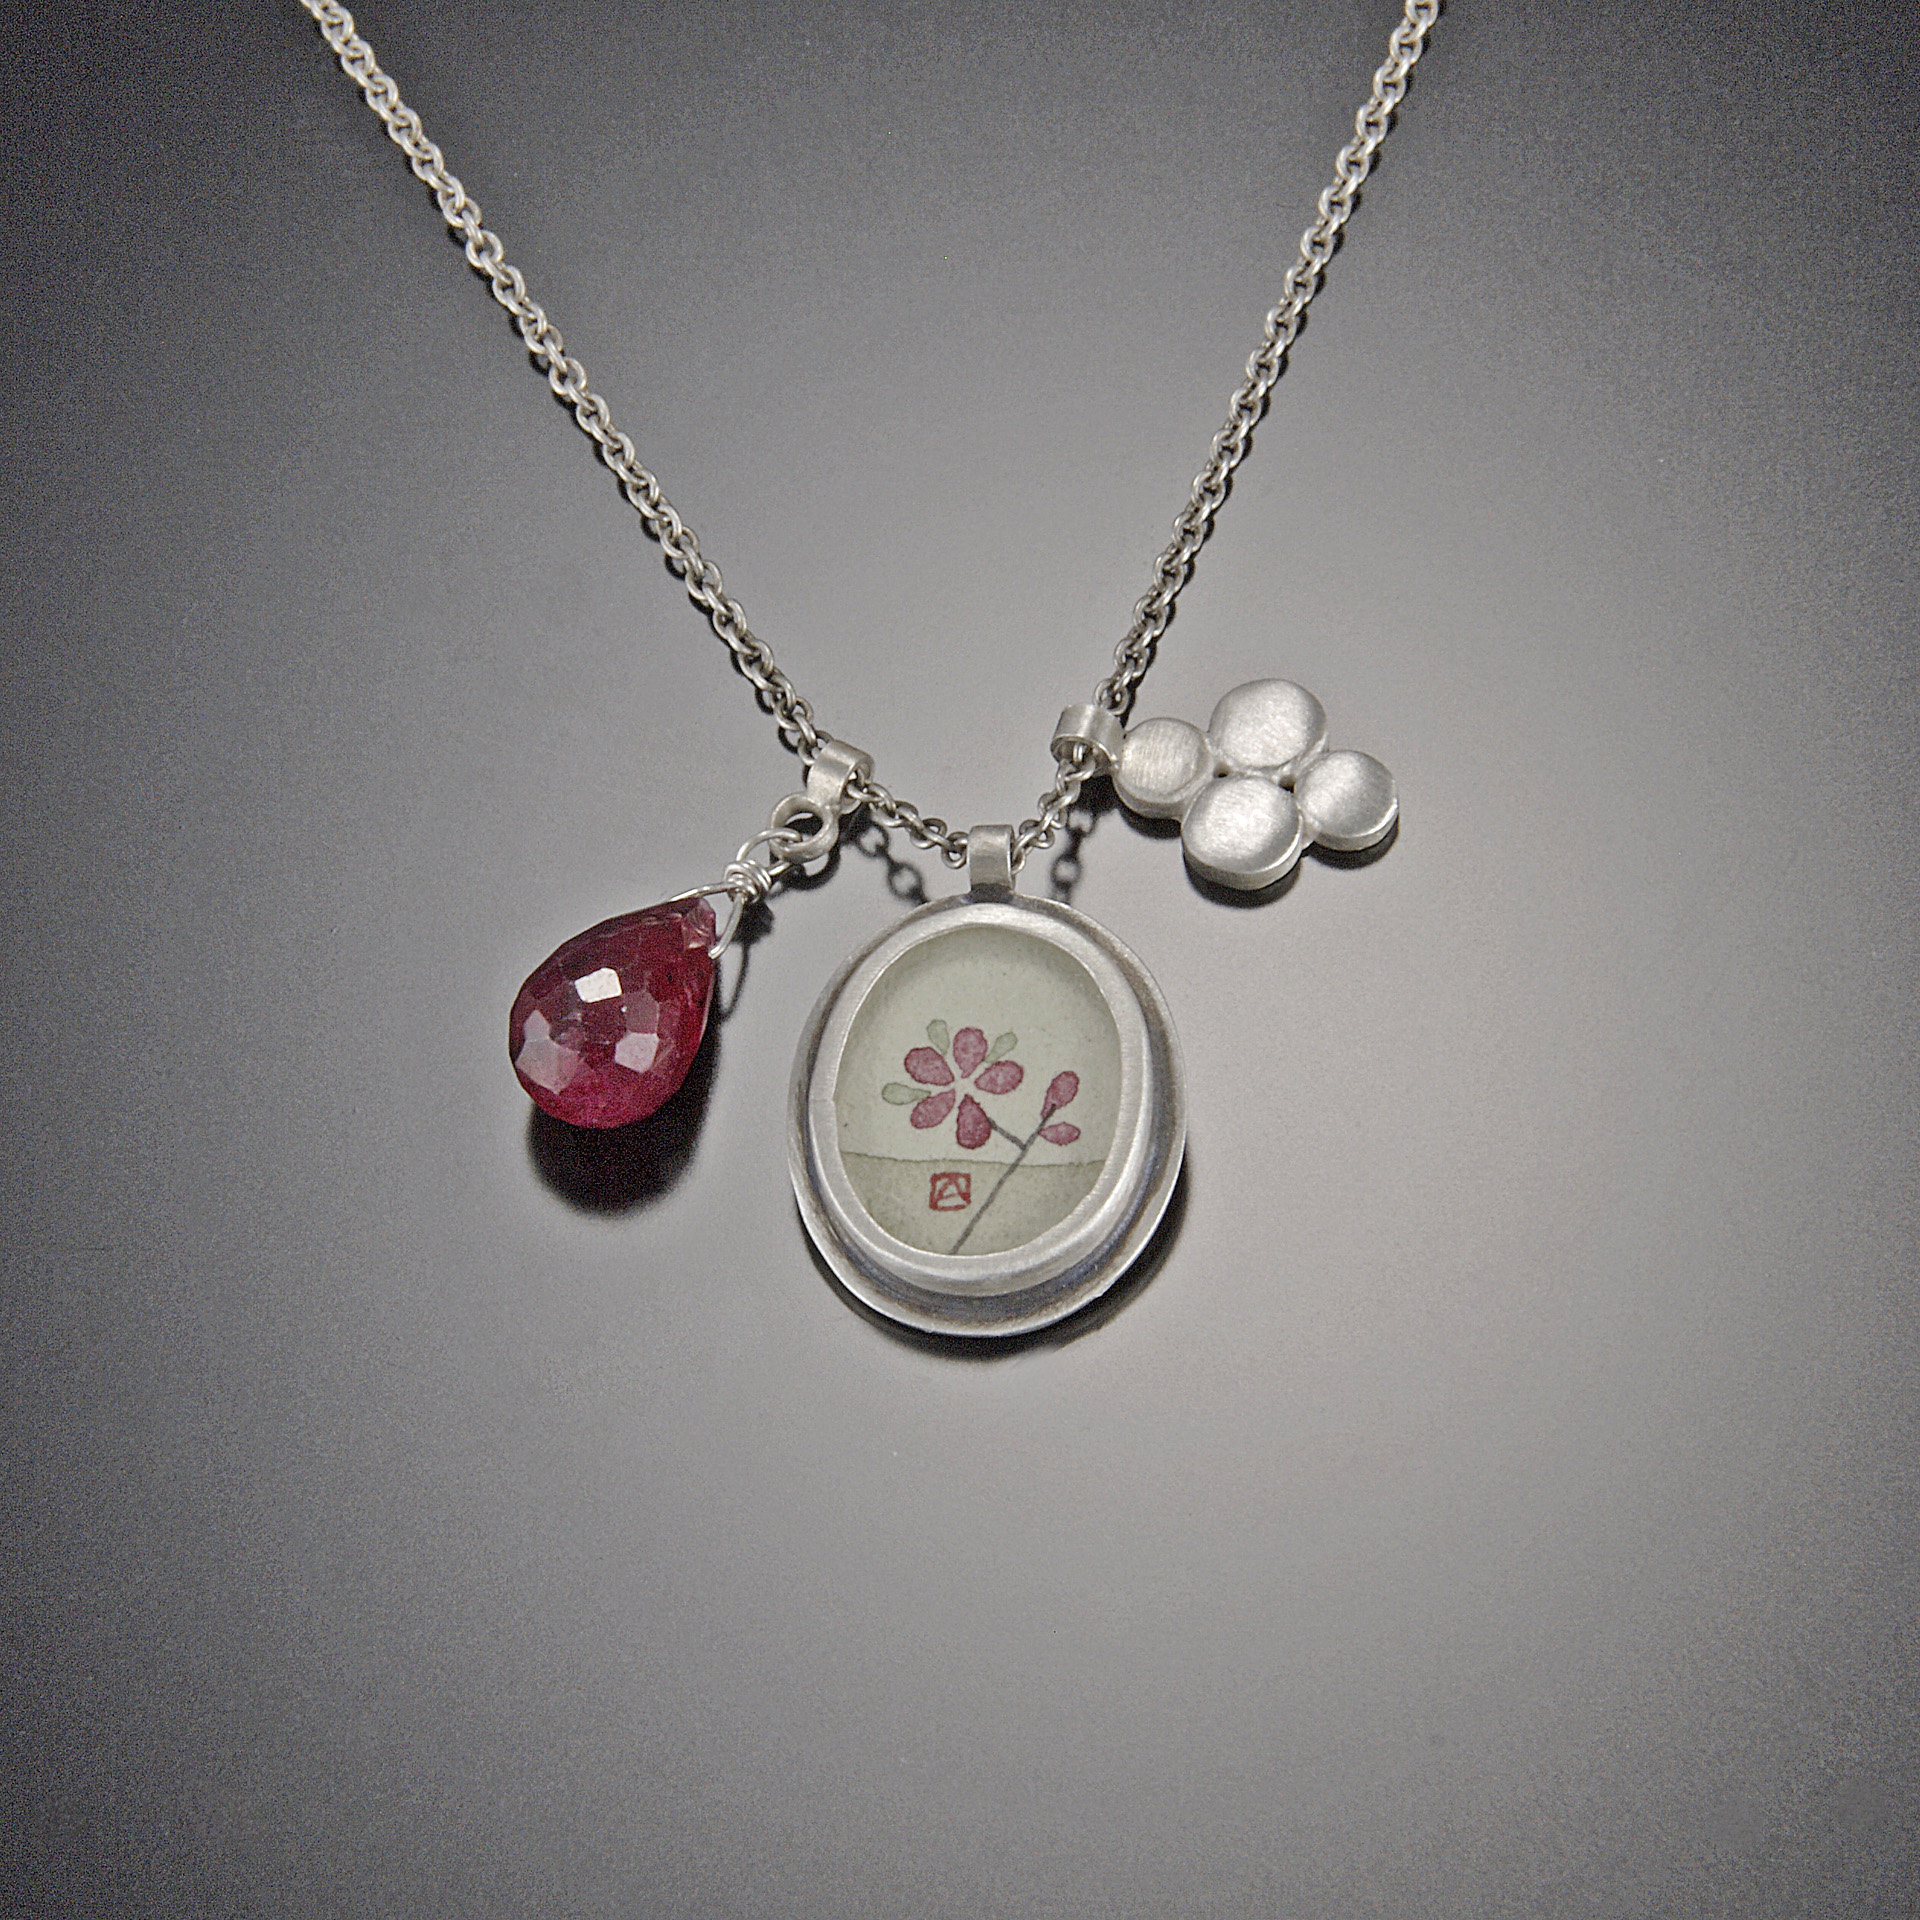 Plum Blossom Charm Necklace with Ruby Drop by Ananda Khalsa (Silver ...